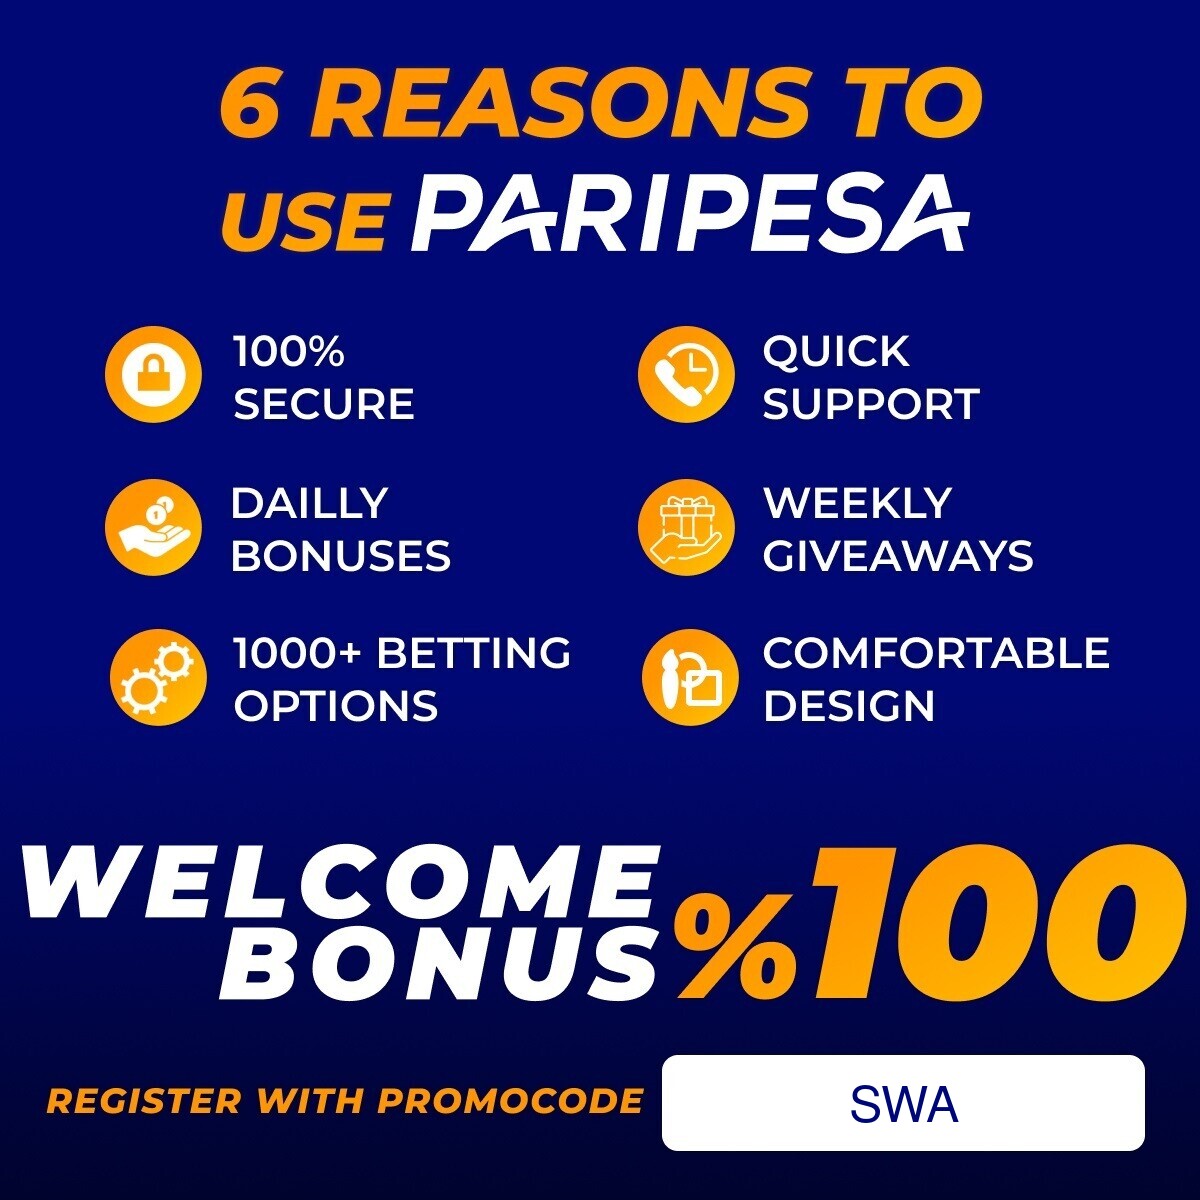 Register now, and Reap Alot. Register with Promo Code: SWA & enjoy seamless bonuses and much more.